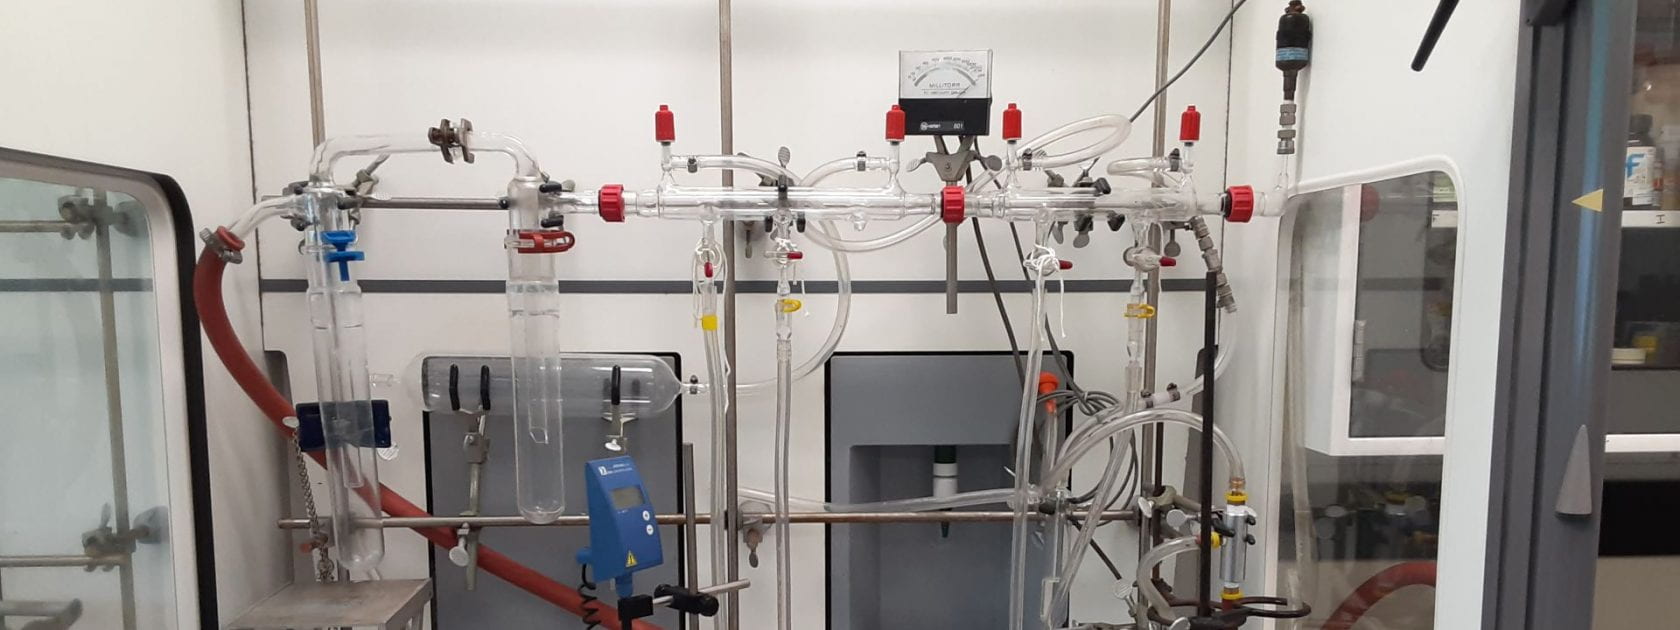 Photo of Schlenk line in a fume hood in the Schlaf lab